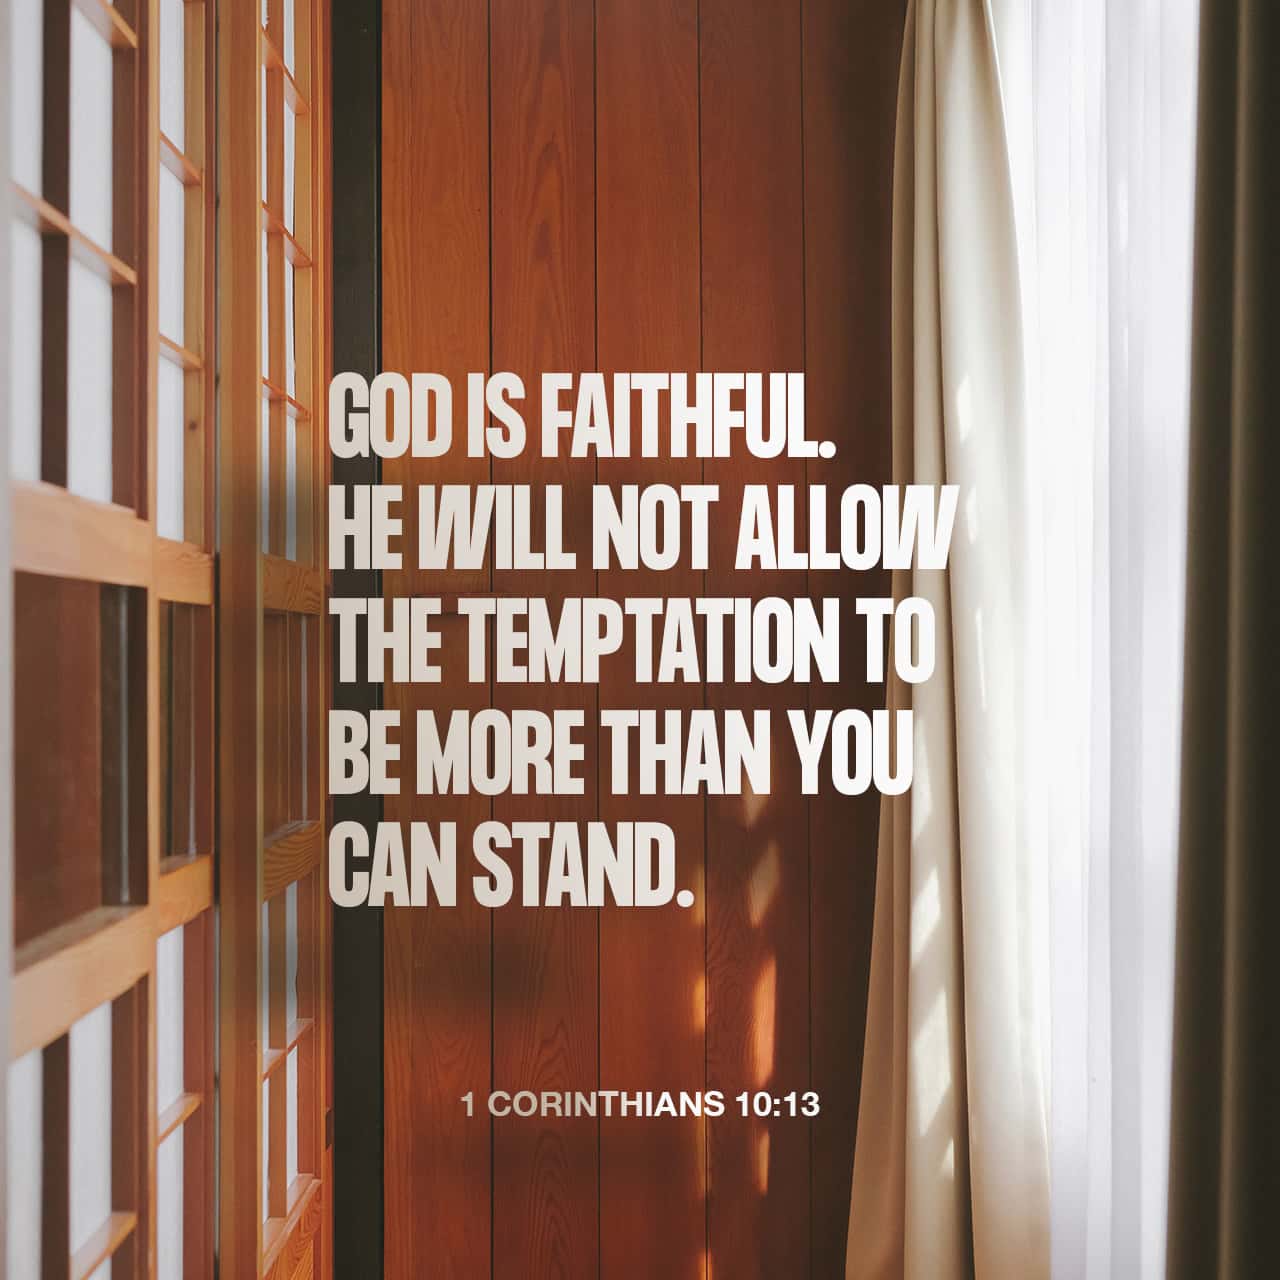 I Corinthians 10:13 No temptation has overtaken you except such as is  common to man; but God is faithful, who will not allow you to be tempted  beyond what you are able